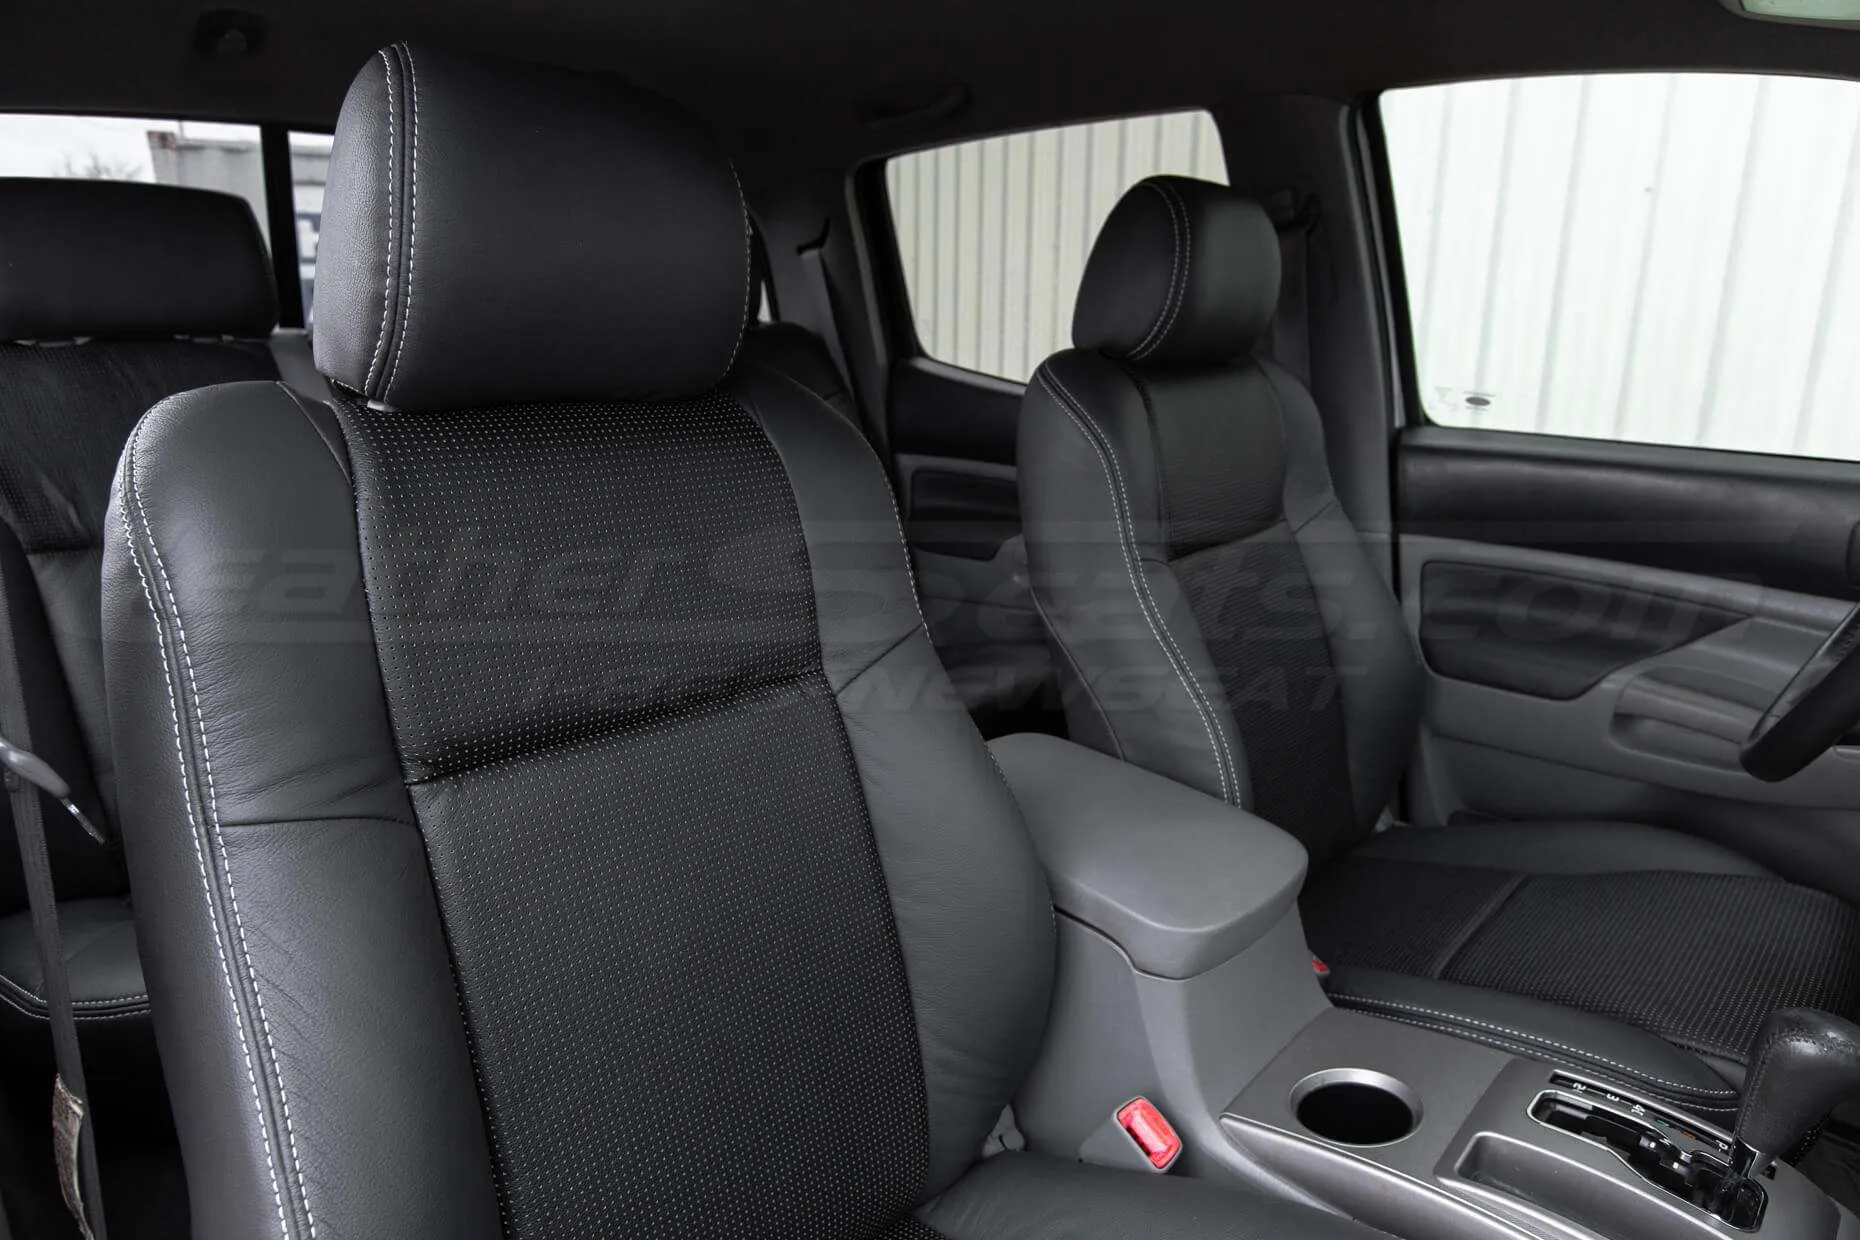 Toyota Tacoma Installed Leather Kit - Black - Installed - Front interior from backrest up